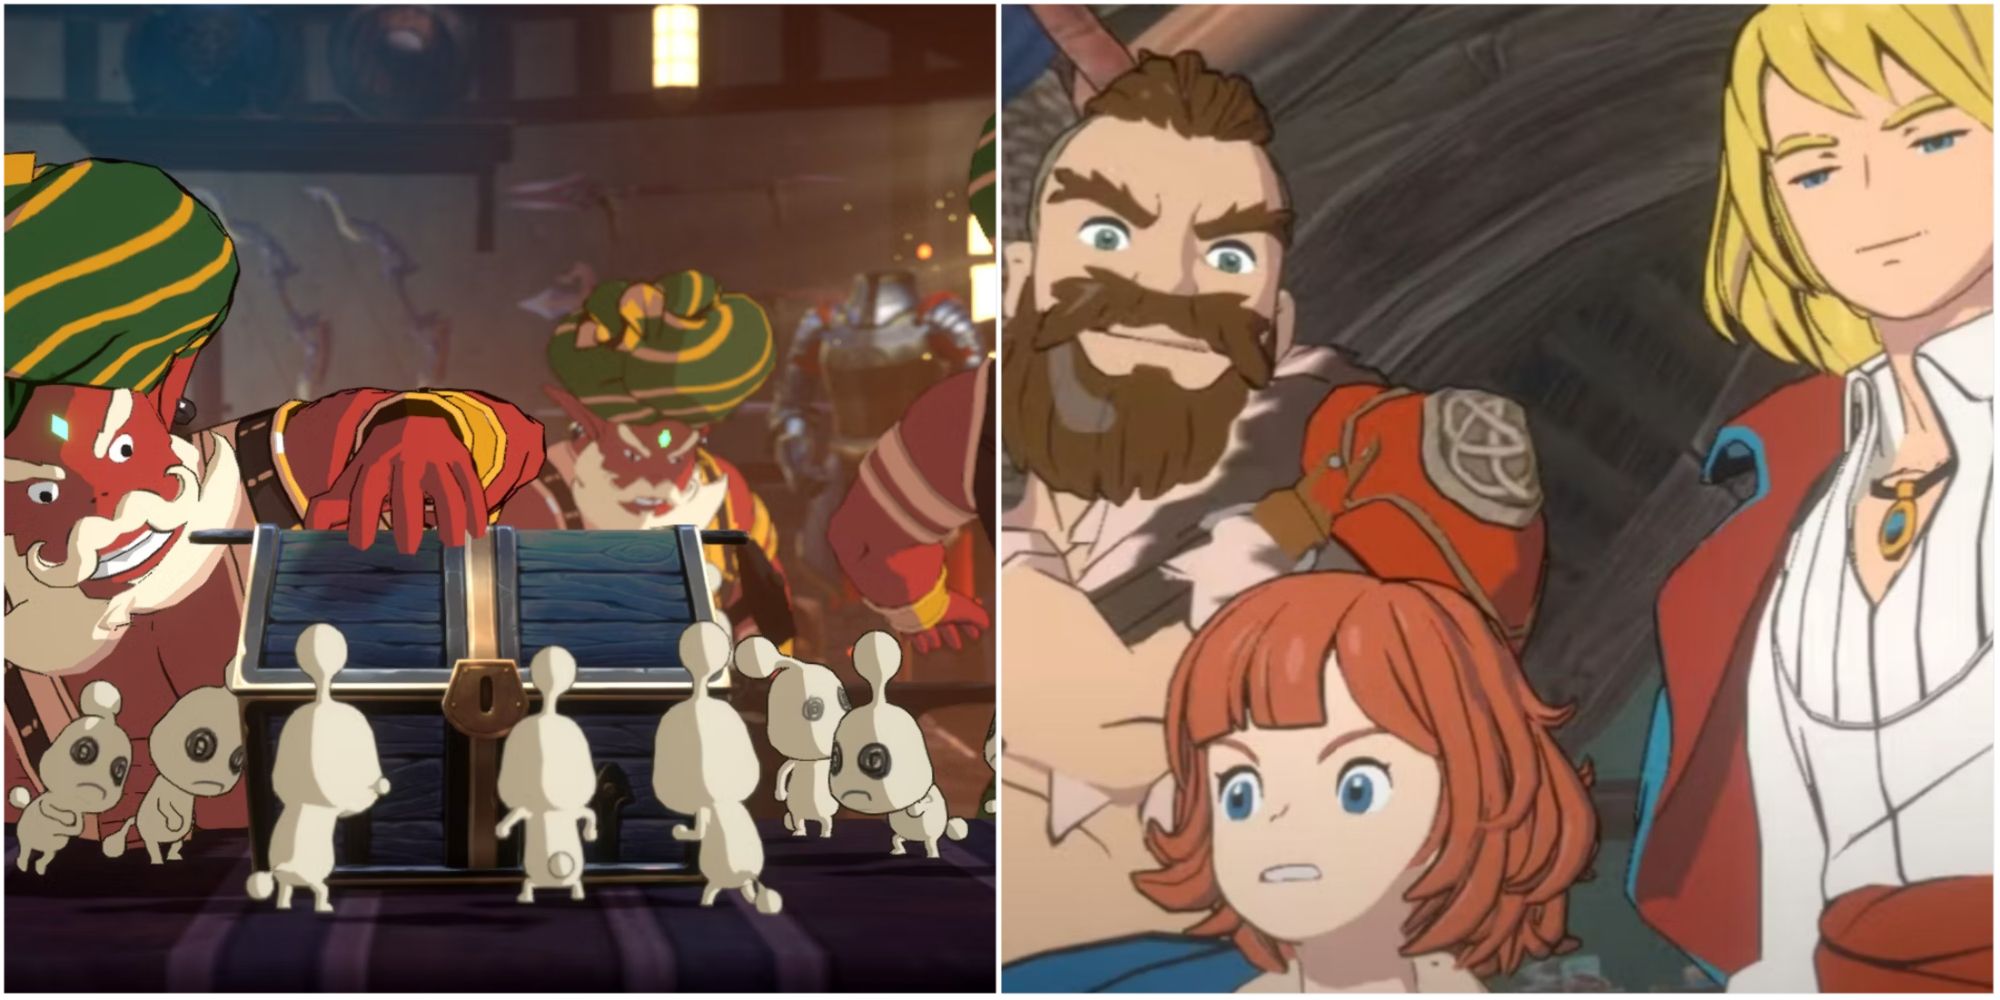 Characters near a chest on the left and three main characters on the right.